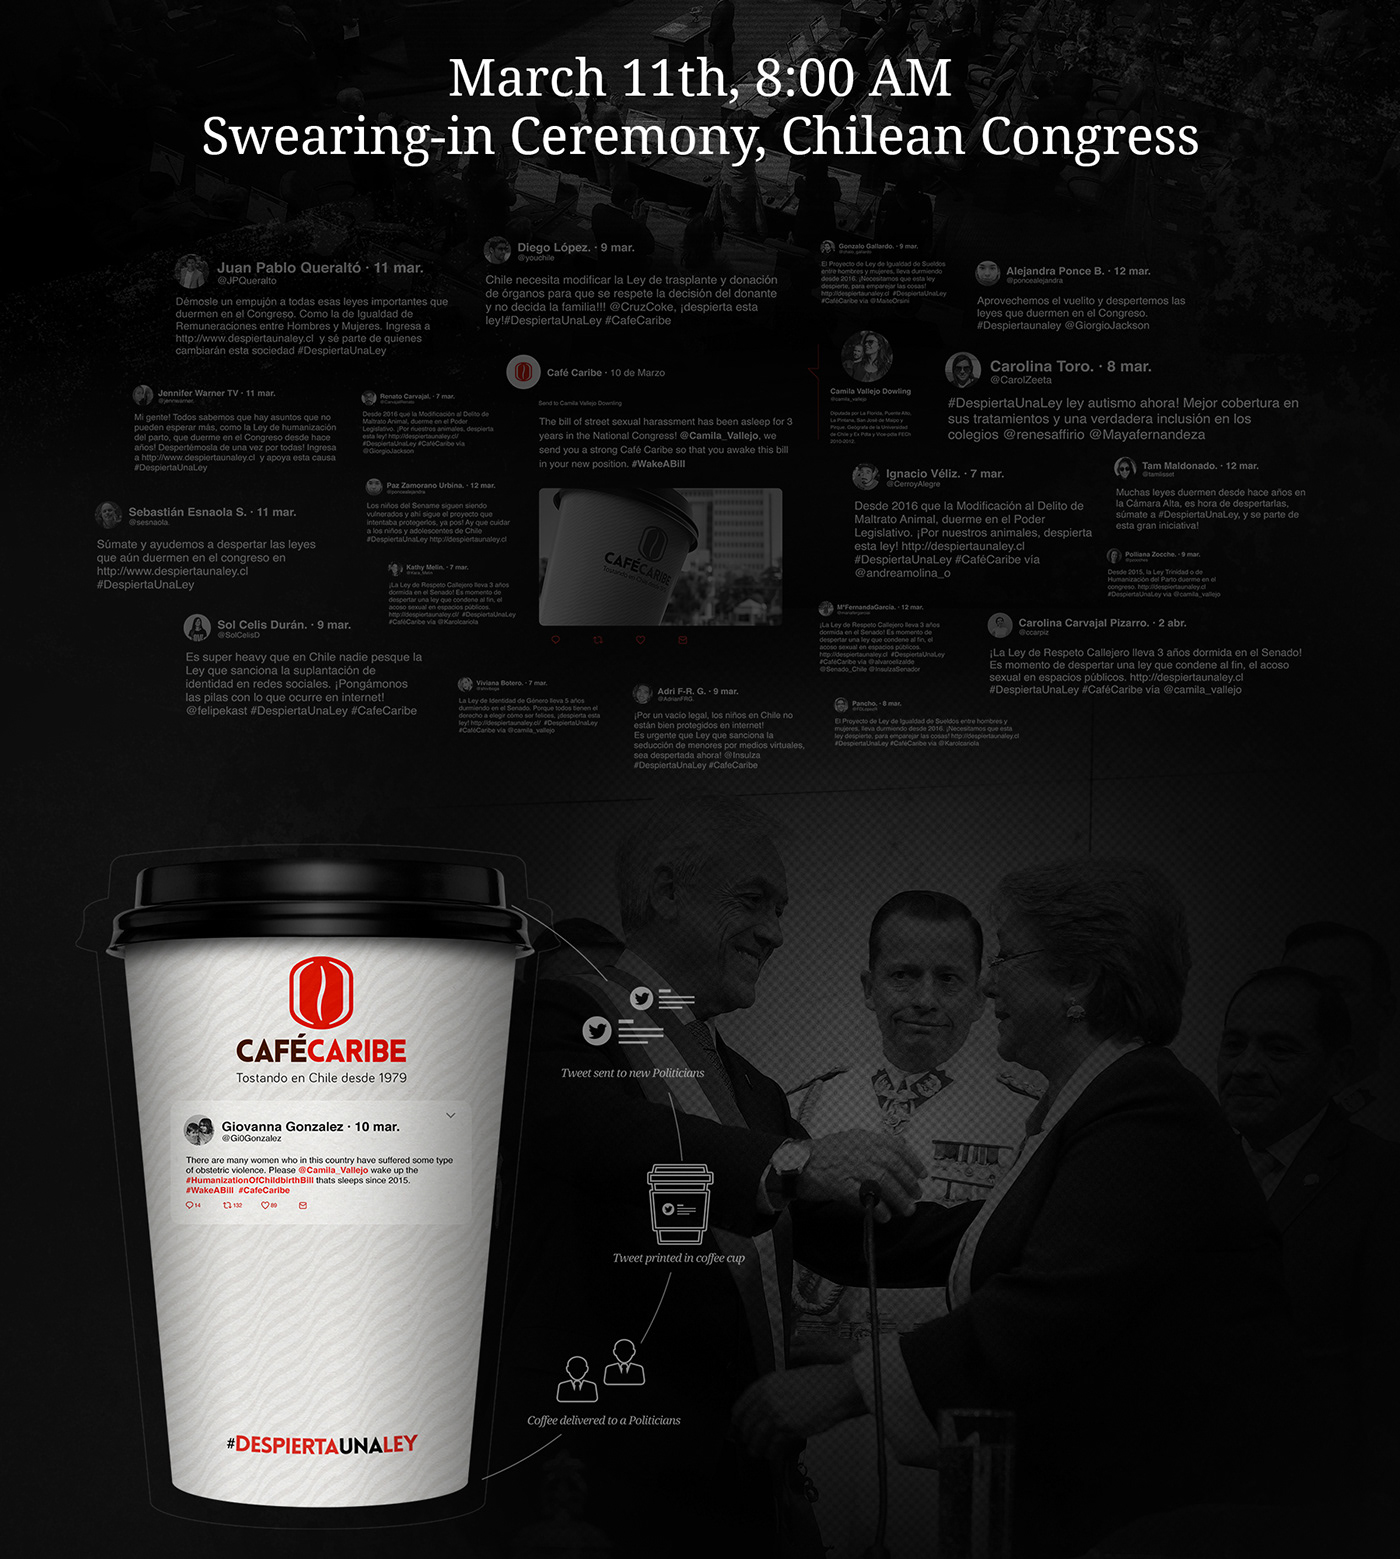 cafe Coffee ads politician congress chile photoshop Cannes lions Cannes festival